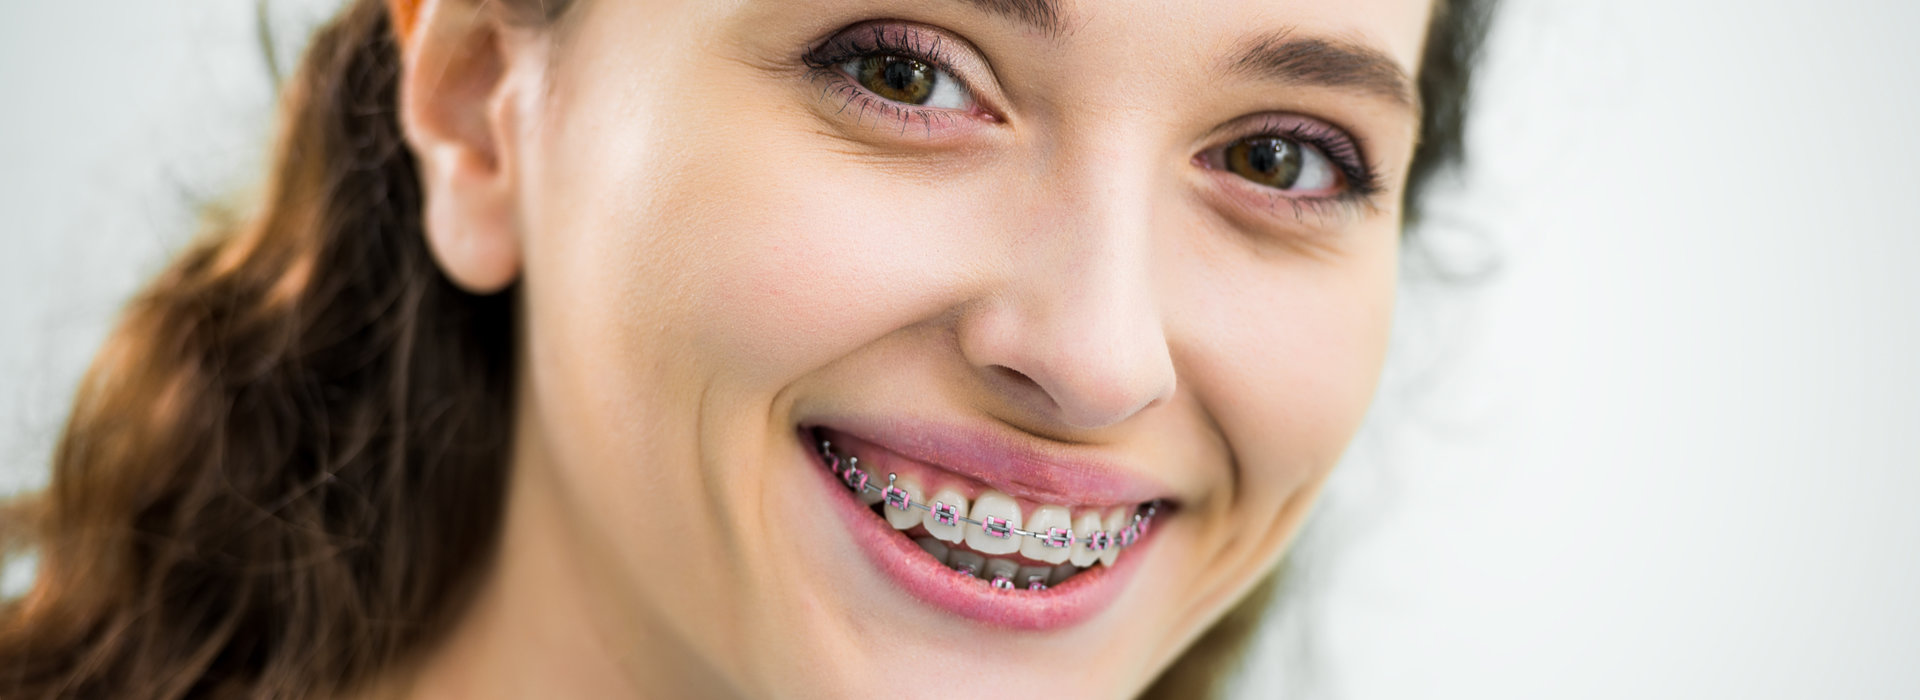 A woman is smiling with traditional braces on her teeth.